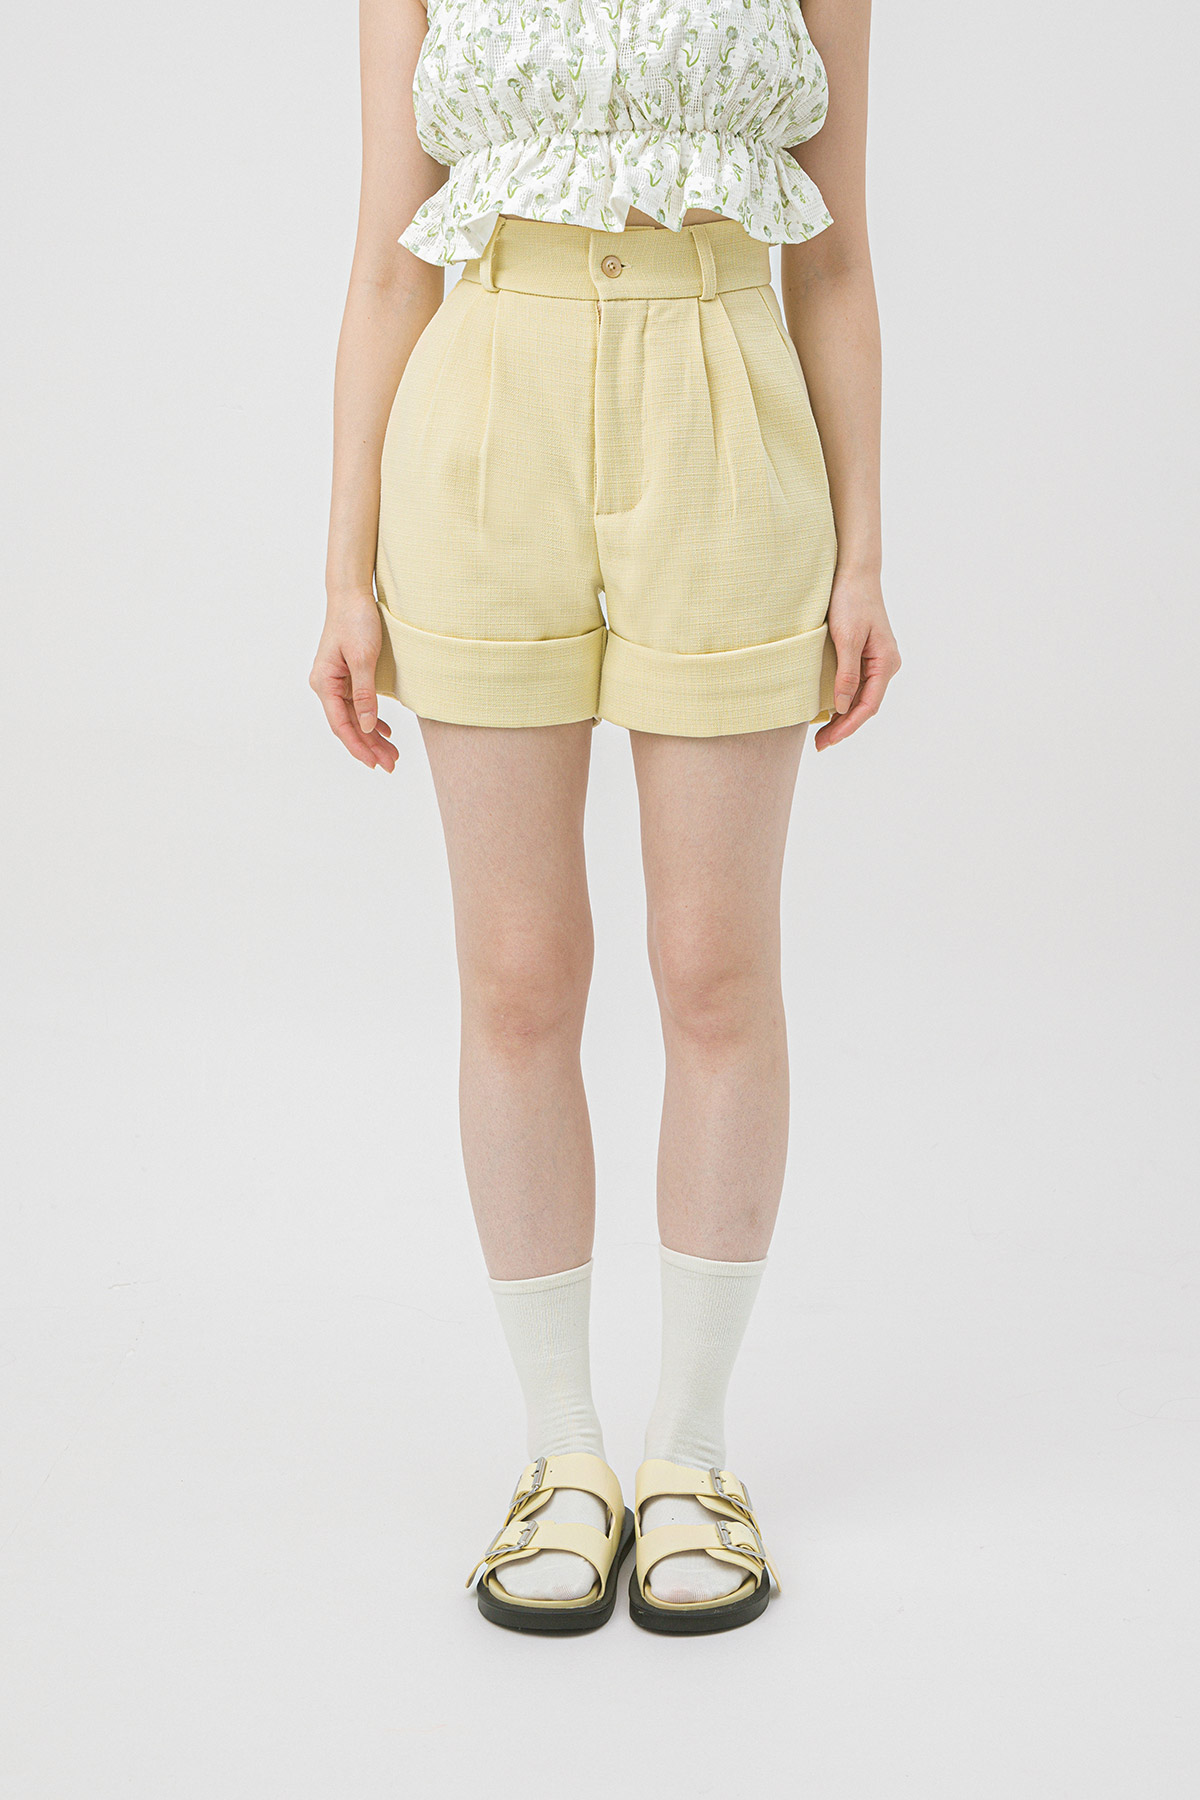 MARTINE SHORTS - LIGHT BUTTER [BY MODPARADE]